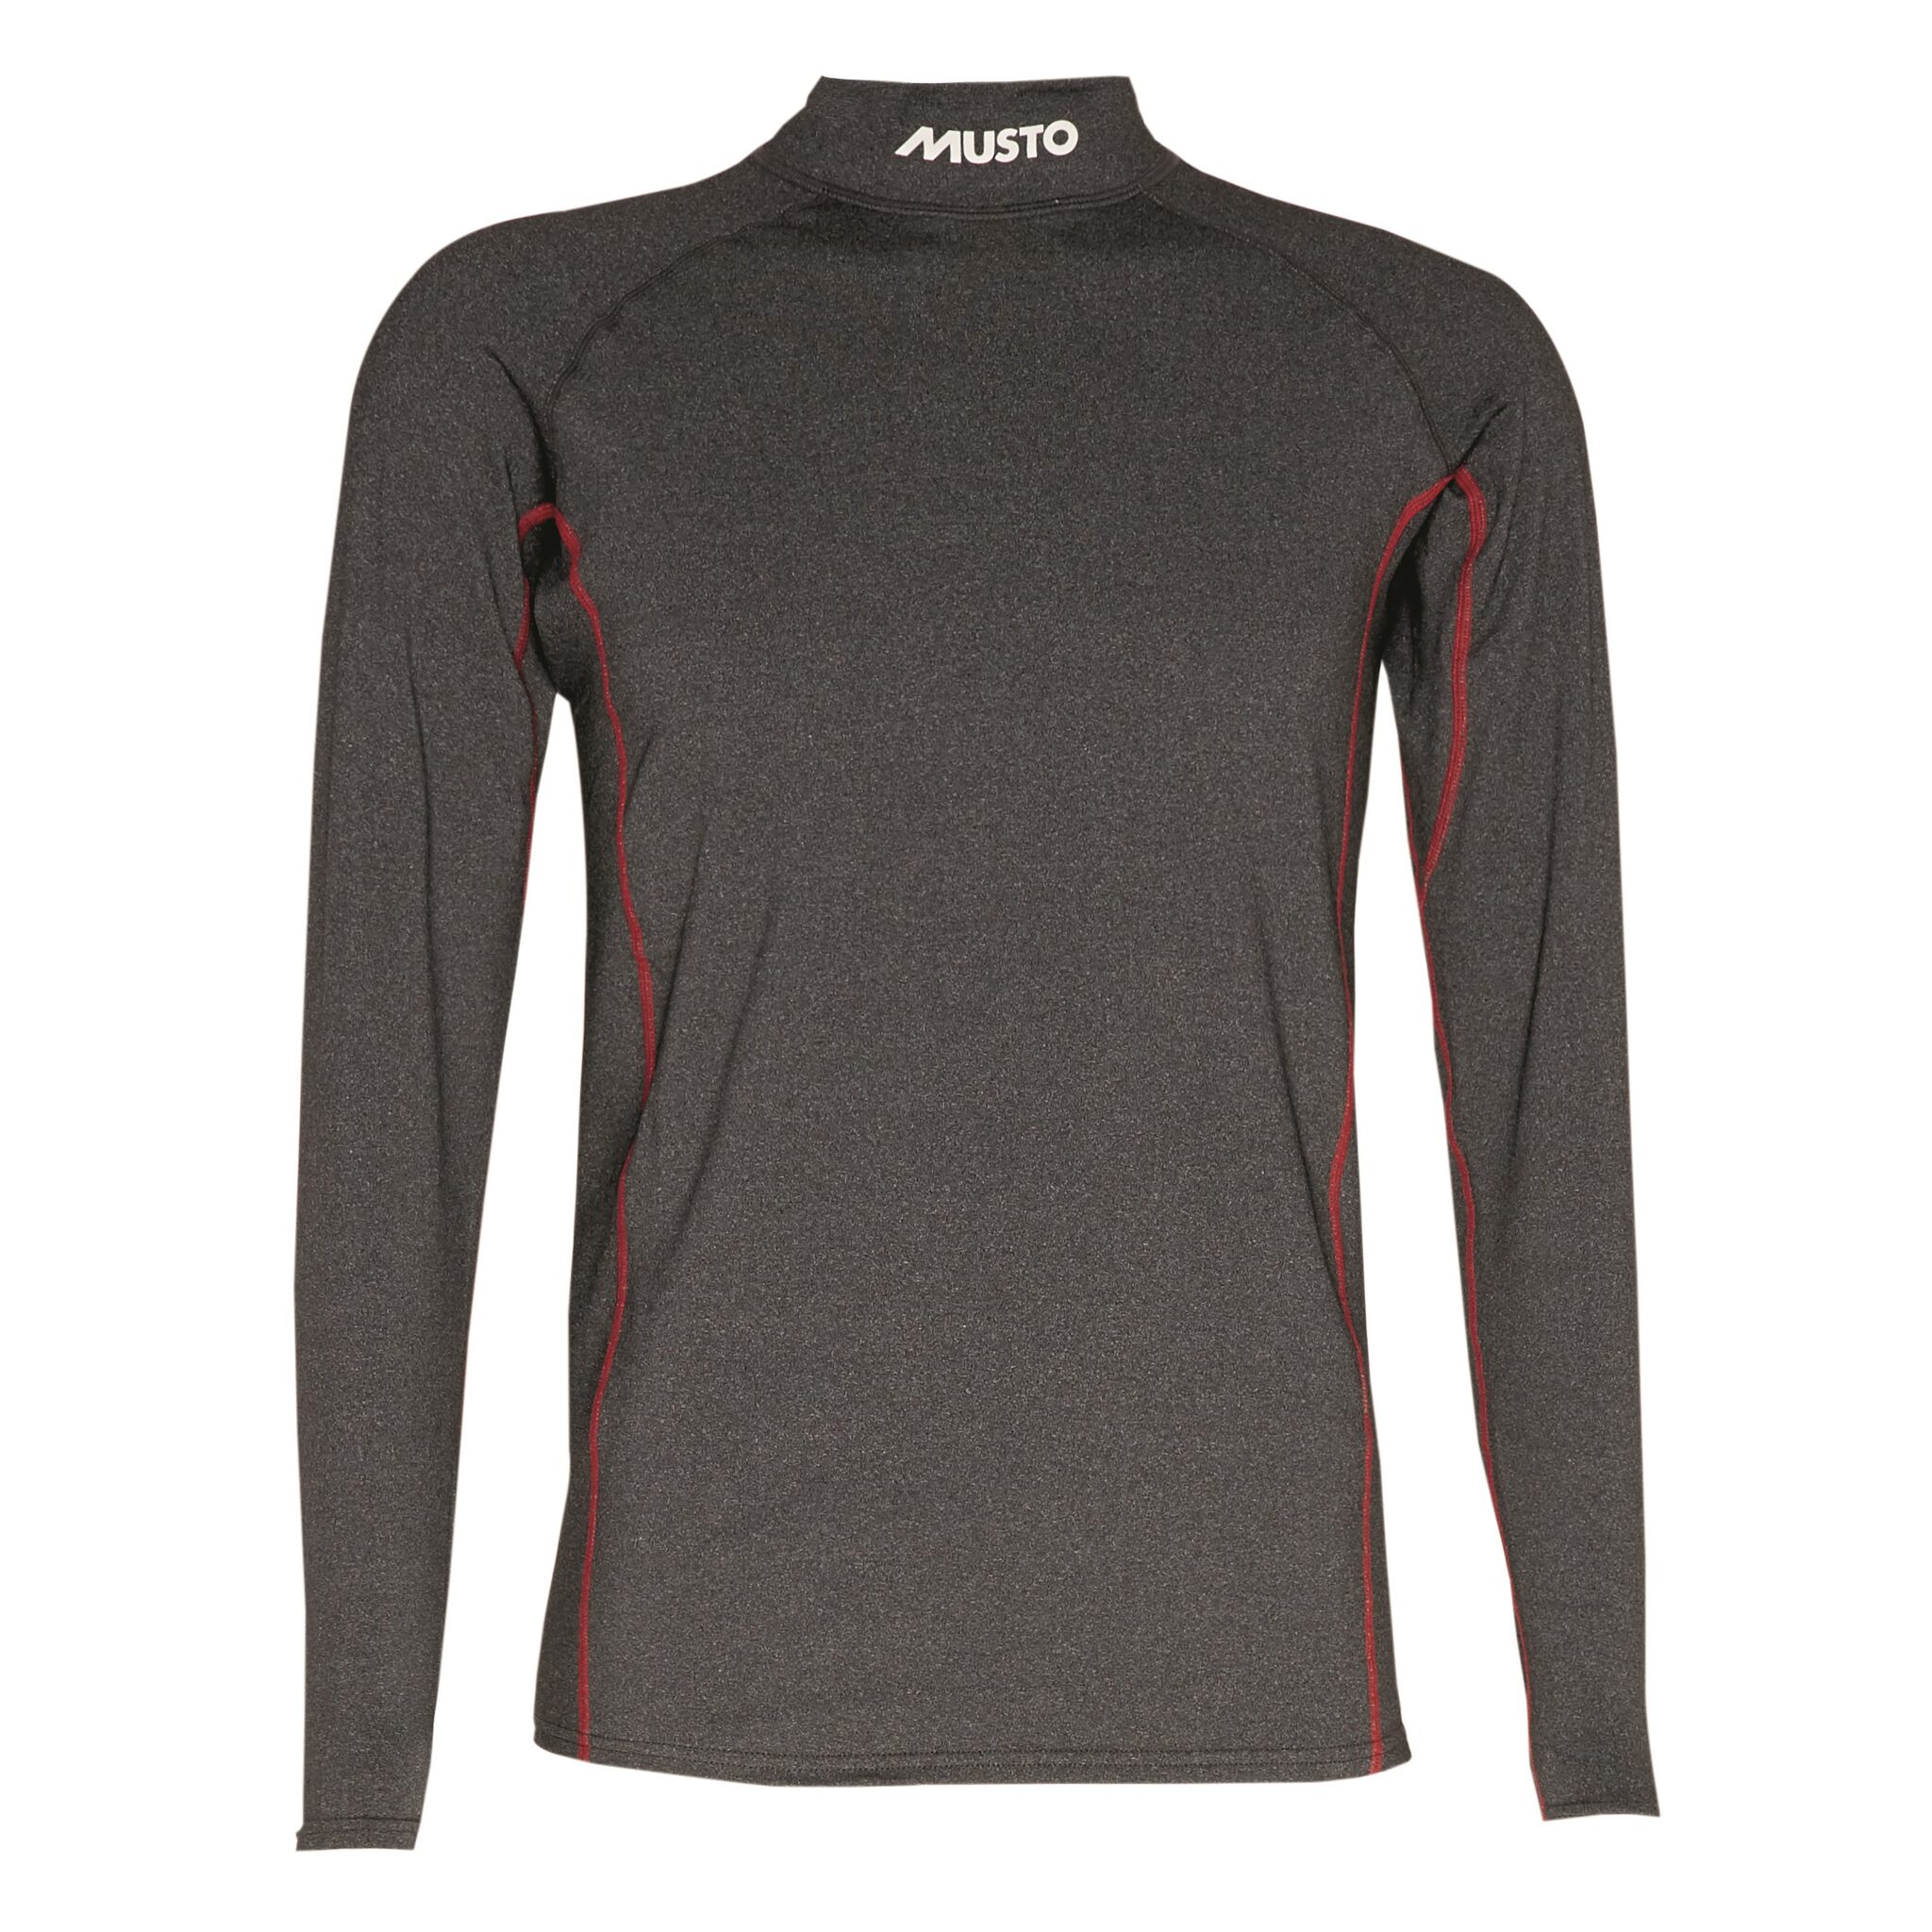 MUSTO thermal baselayer shirt for men and women